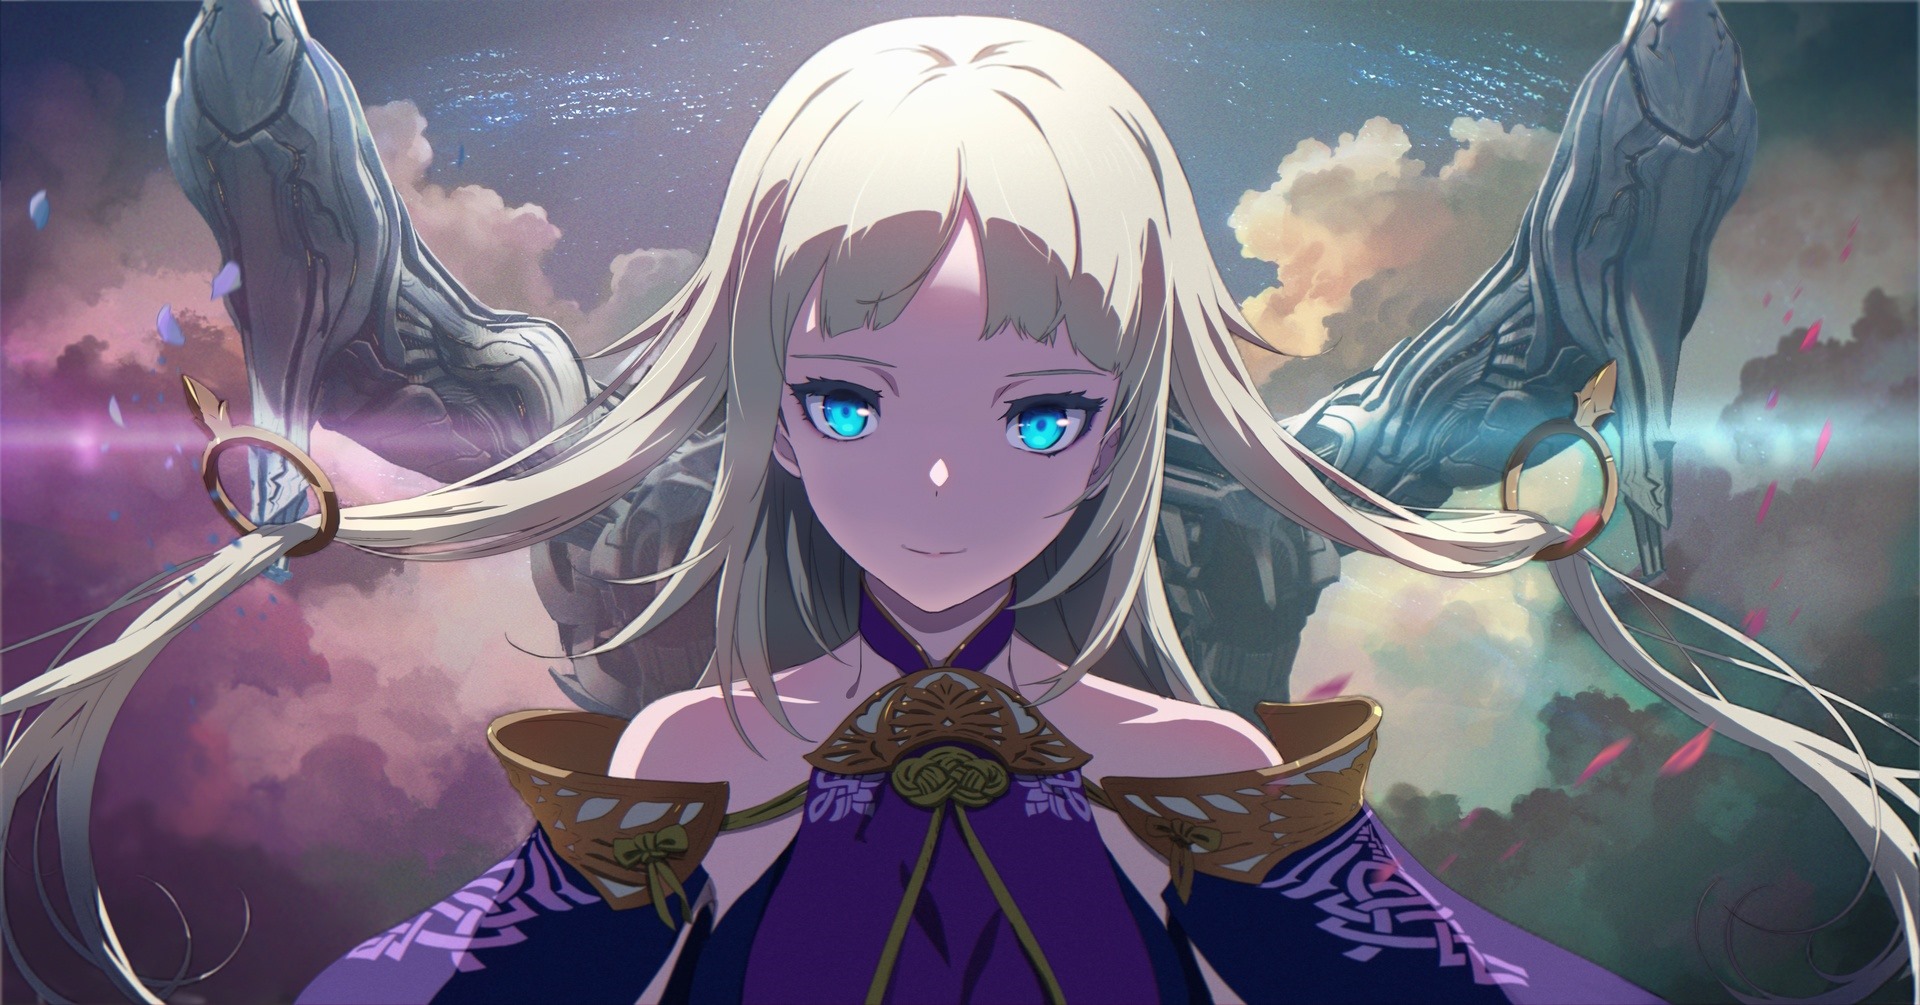 Blue Protocol Is A Gorgeous Online Action RPG From Bandai Namco That Looks  Like A Playable Anime